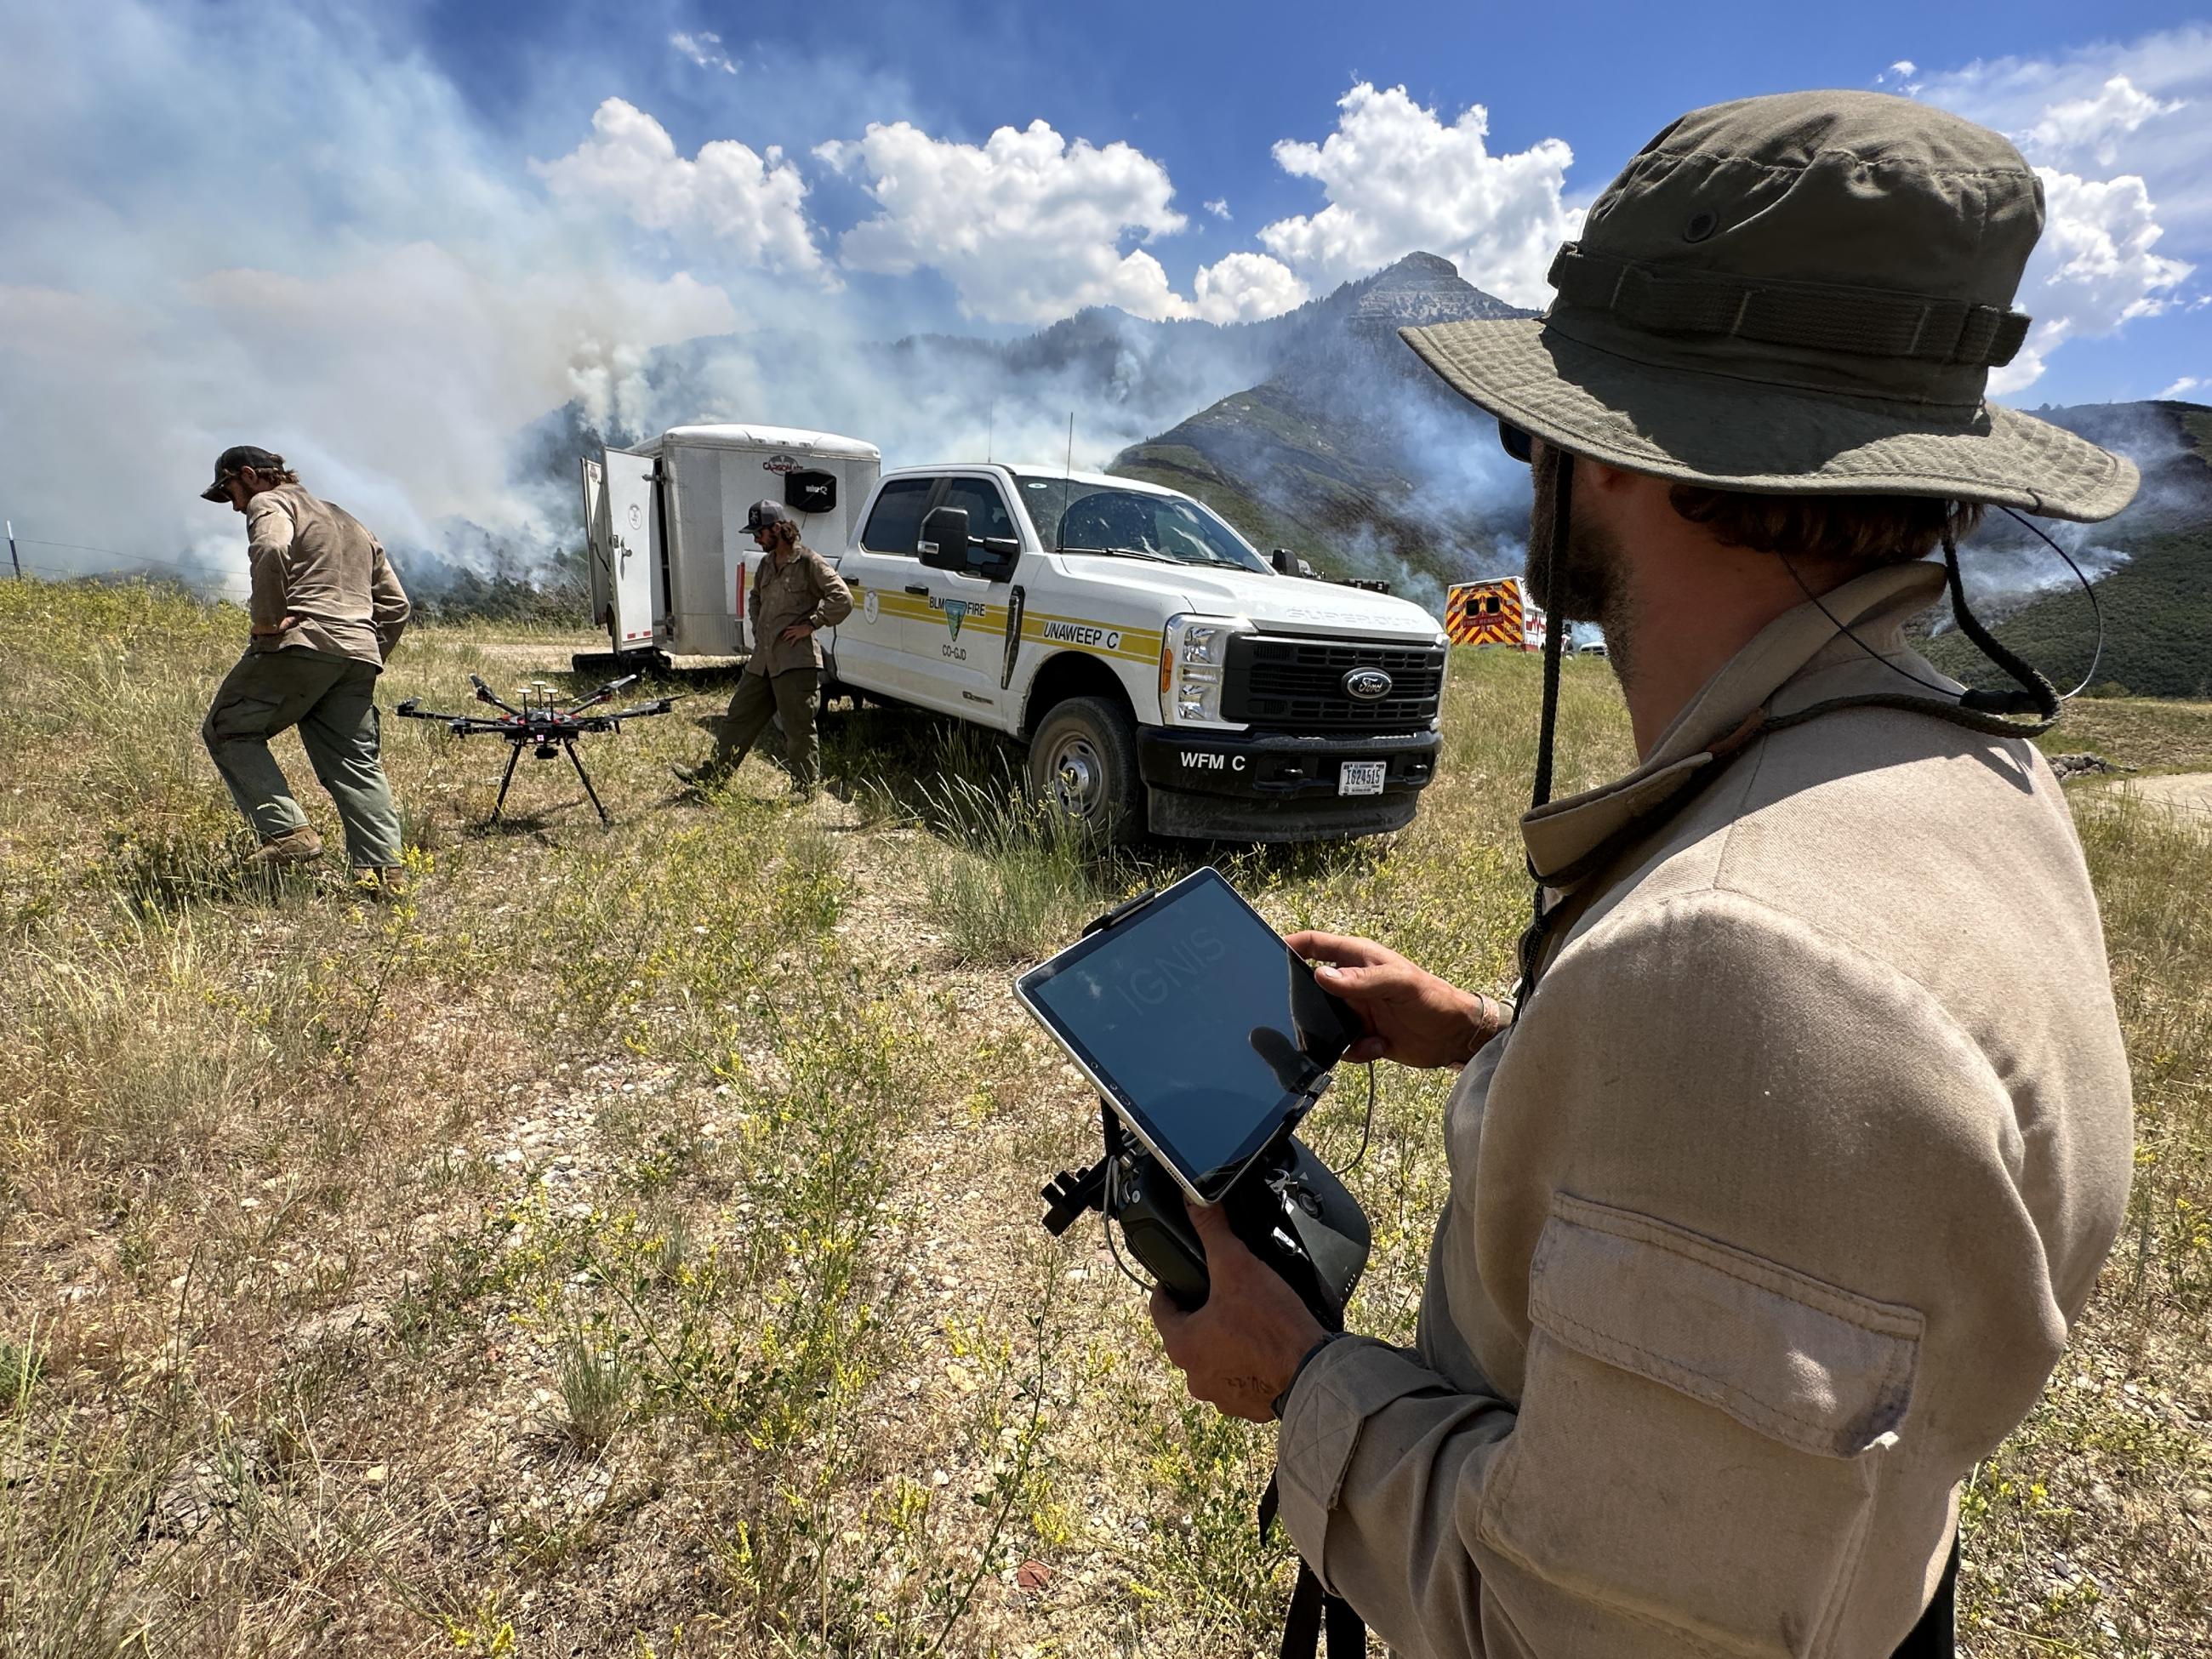 Drone personnel with drone on ground and smoke in background